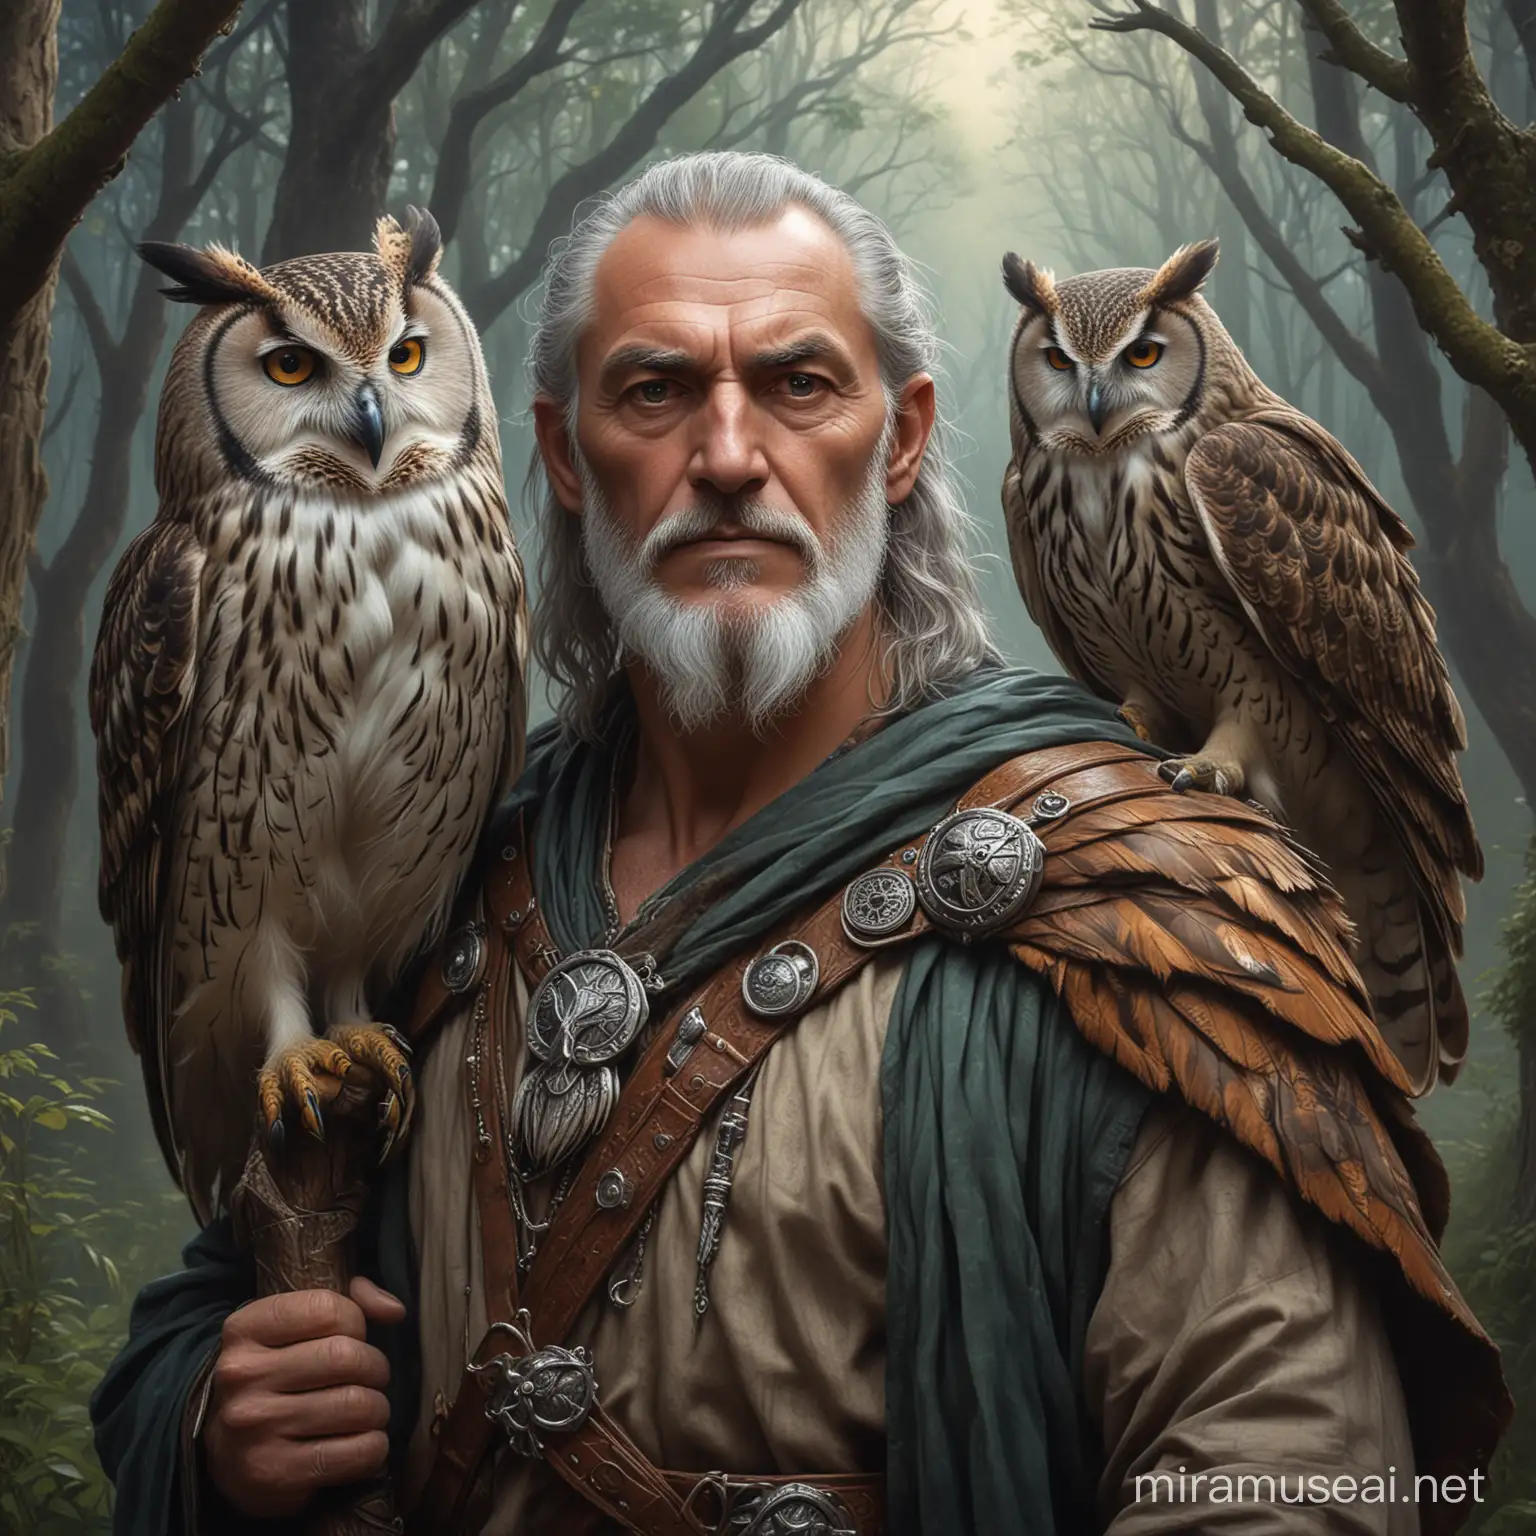 Majestic Druid with Owl Companion Fantasy Oil Painting Artwork